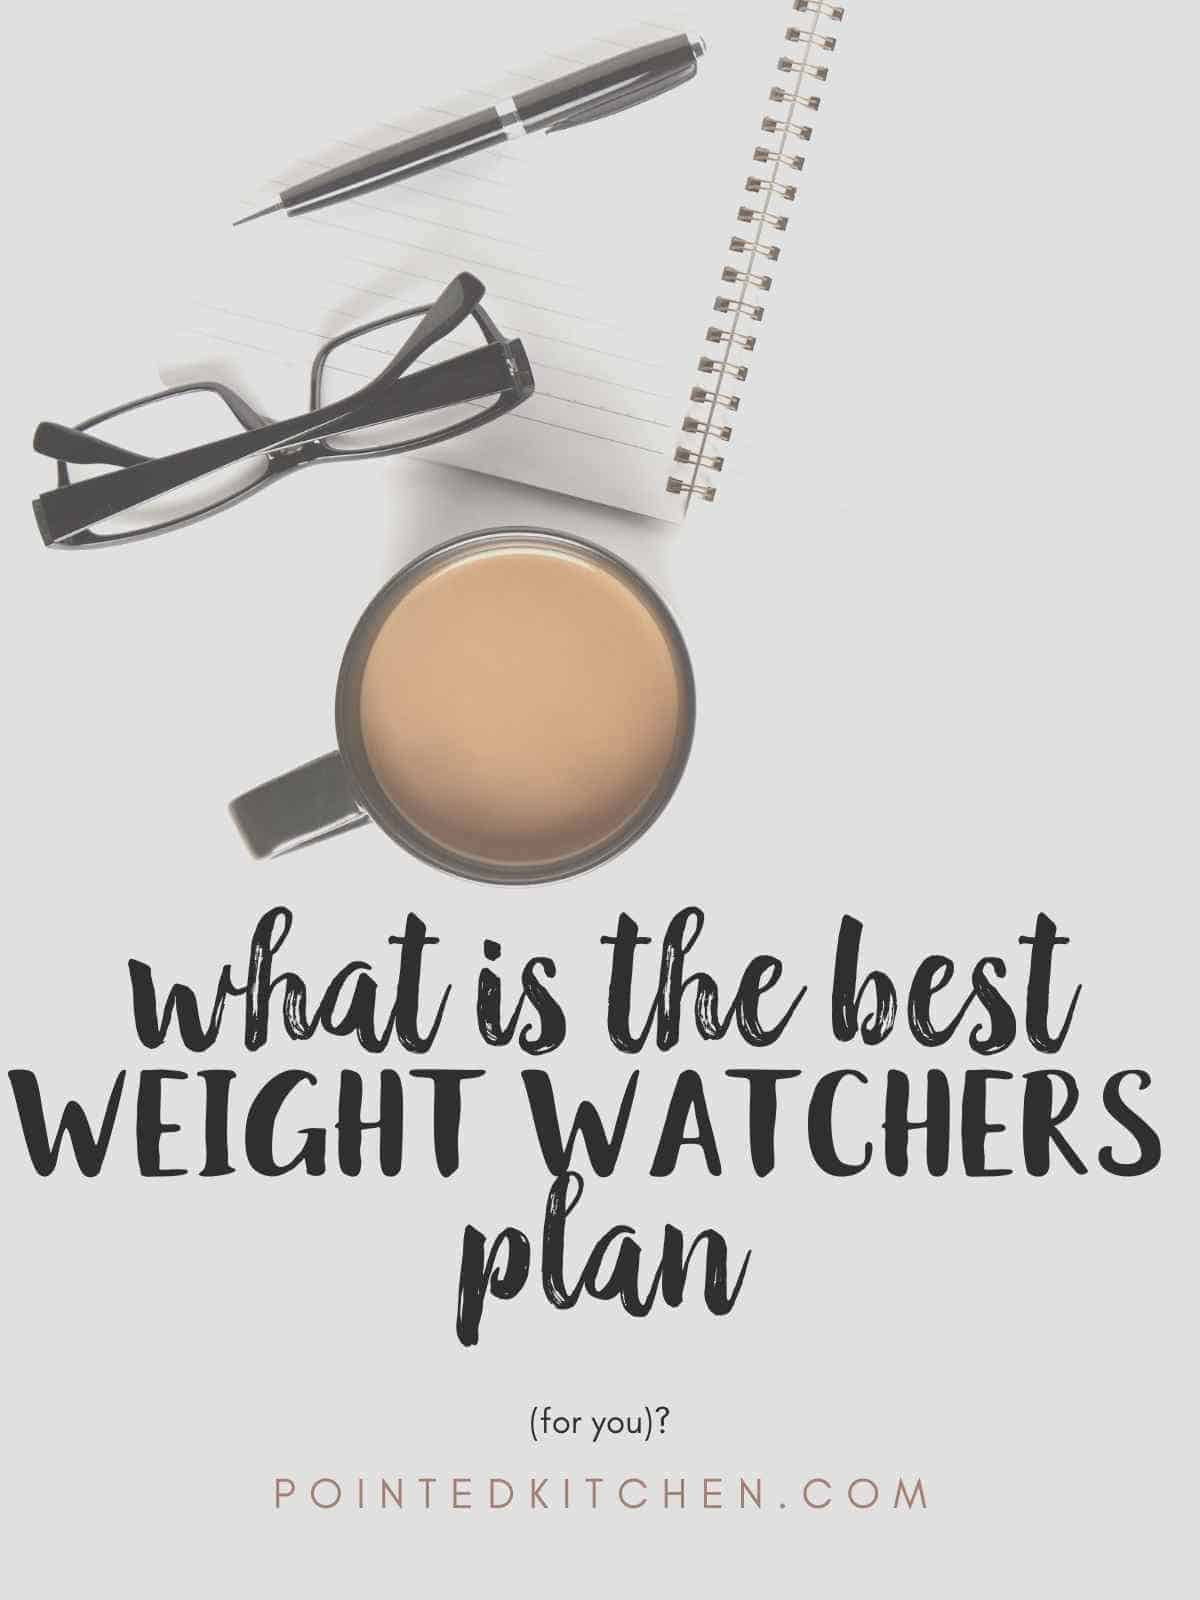 A notebook, pen, glasses and coffee mug with text overlay stating 'what is the best Weight Watchers plan for you".